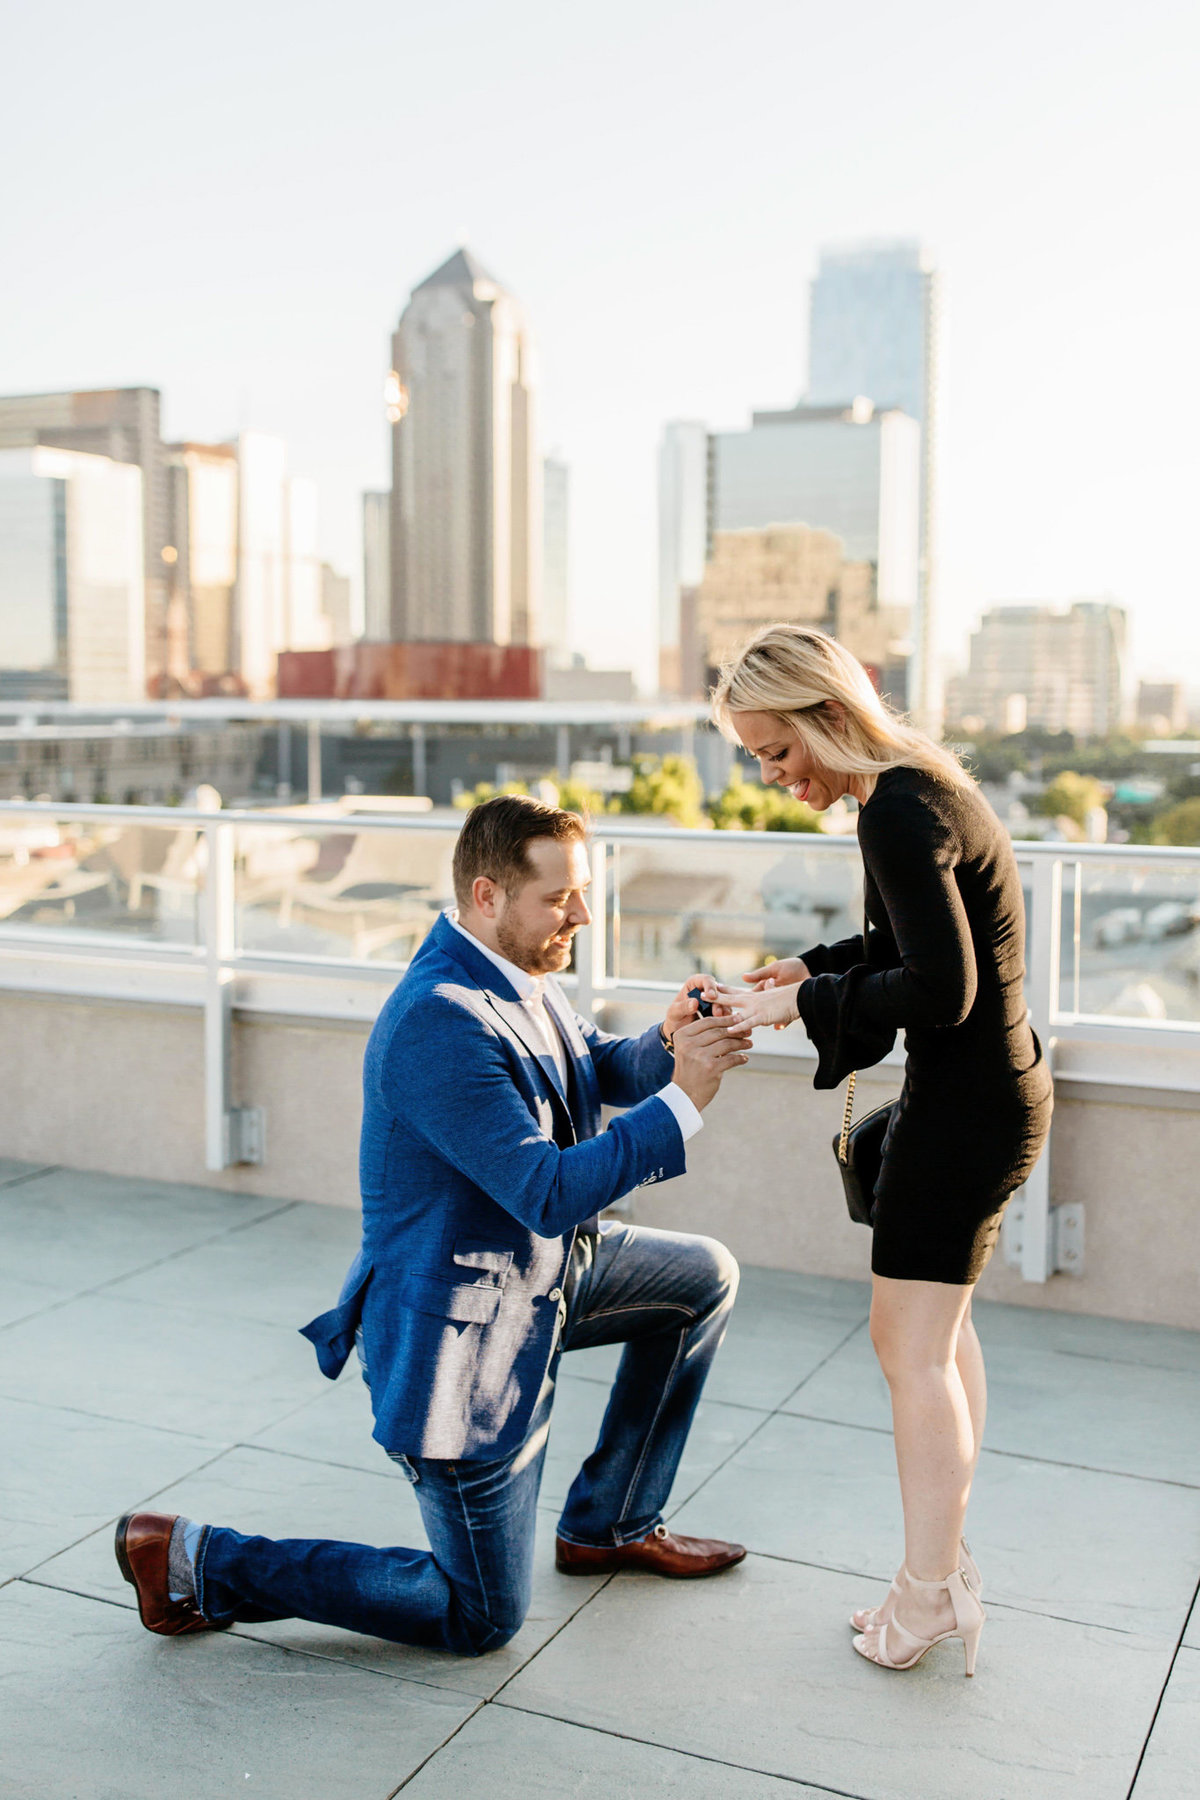 Eric & Megan - Downtown Dallas Rooftop Proposal & Engagement Session-36